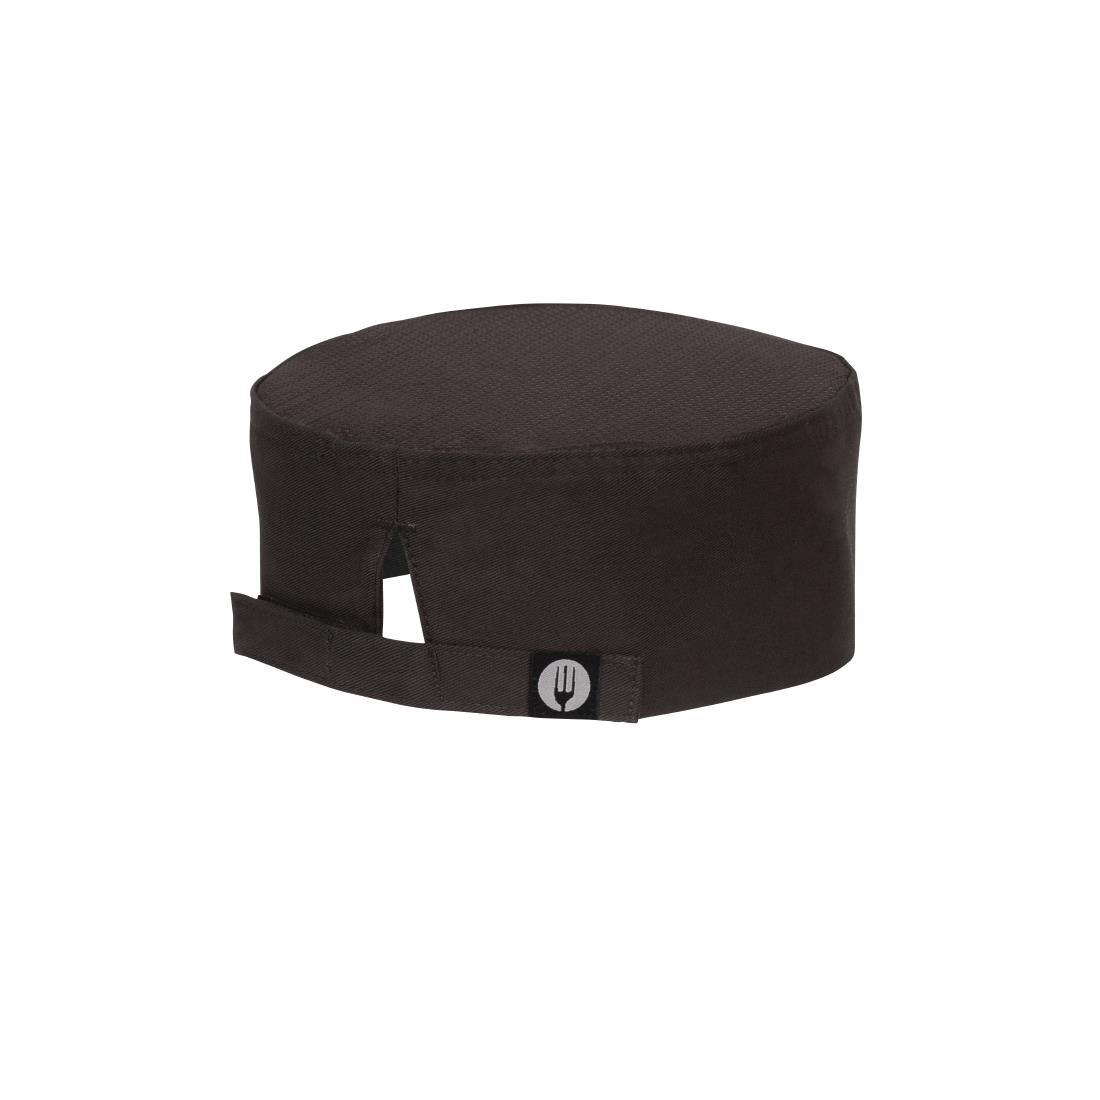 Chef Works Cool Vent Beanie Black - A704  - 2